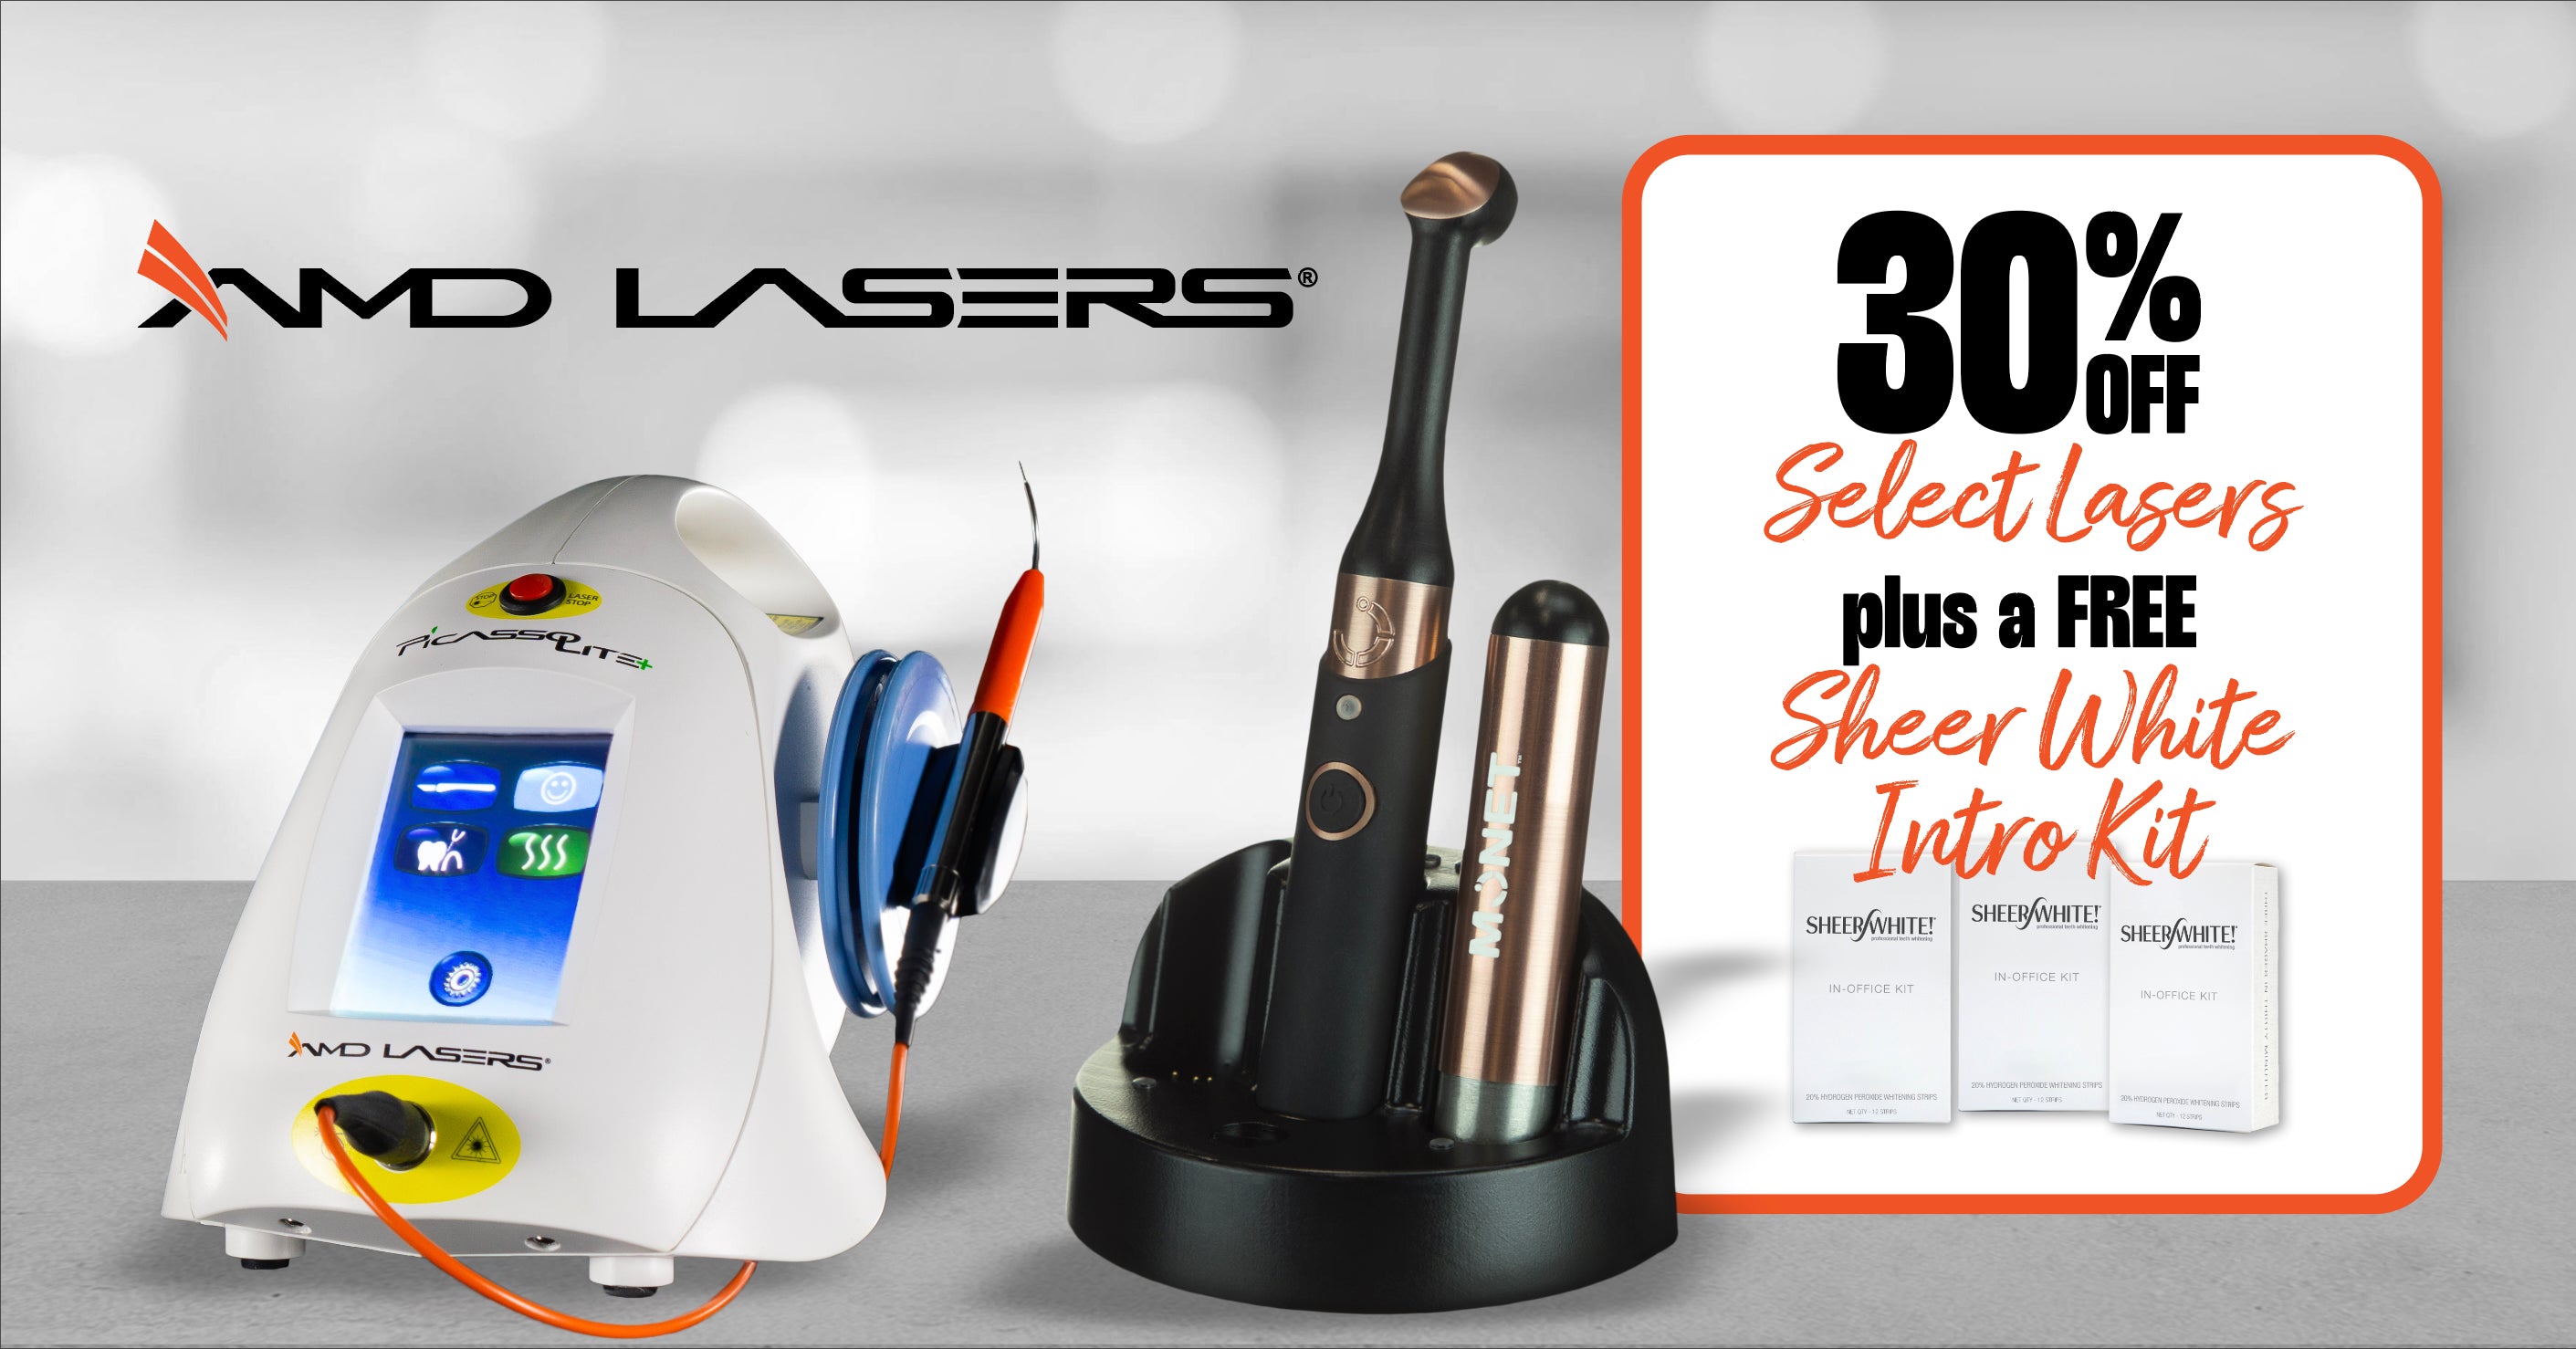 30 OFF LASER + SW - selected lasers 1200x628.jpg__PID:471e9adf-d66c-4623-952a-67fb34b494ee